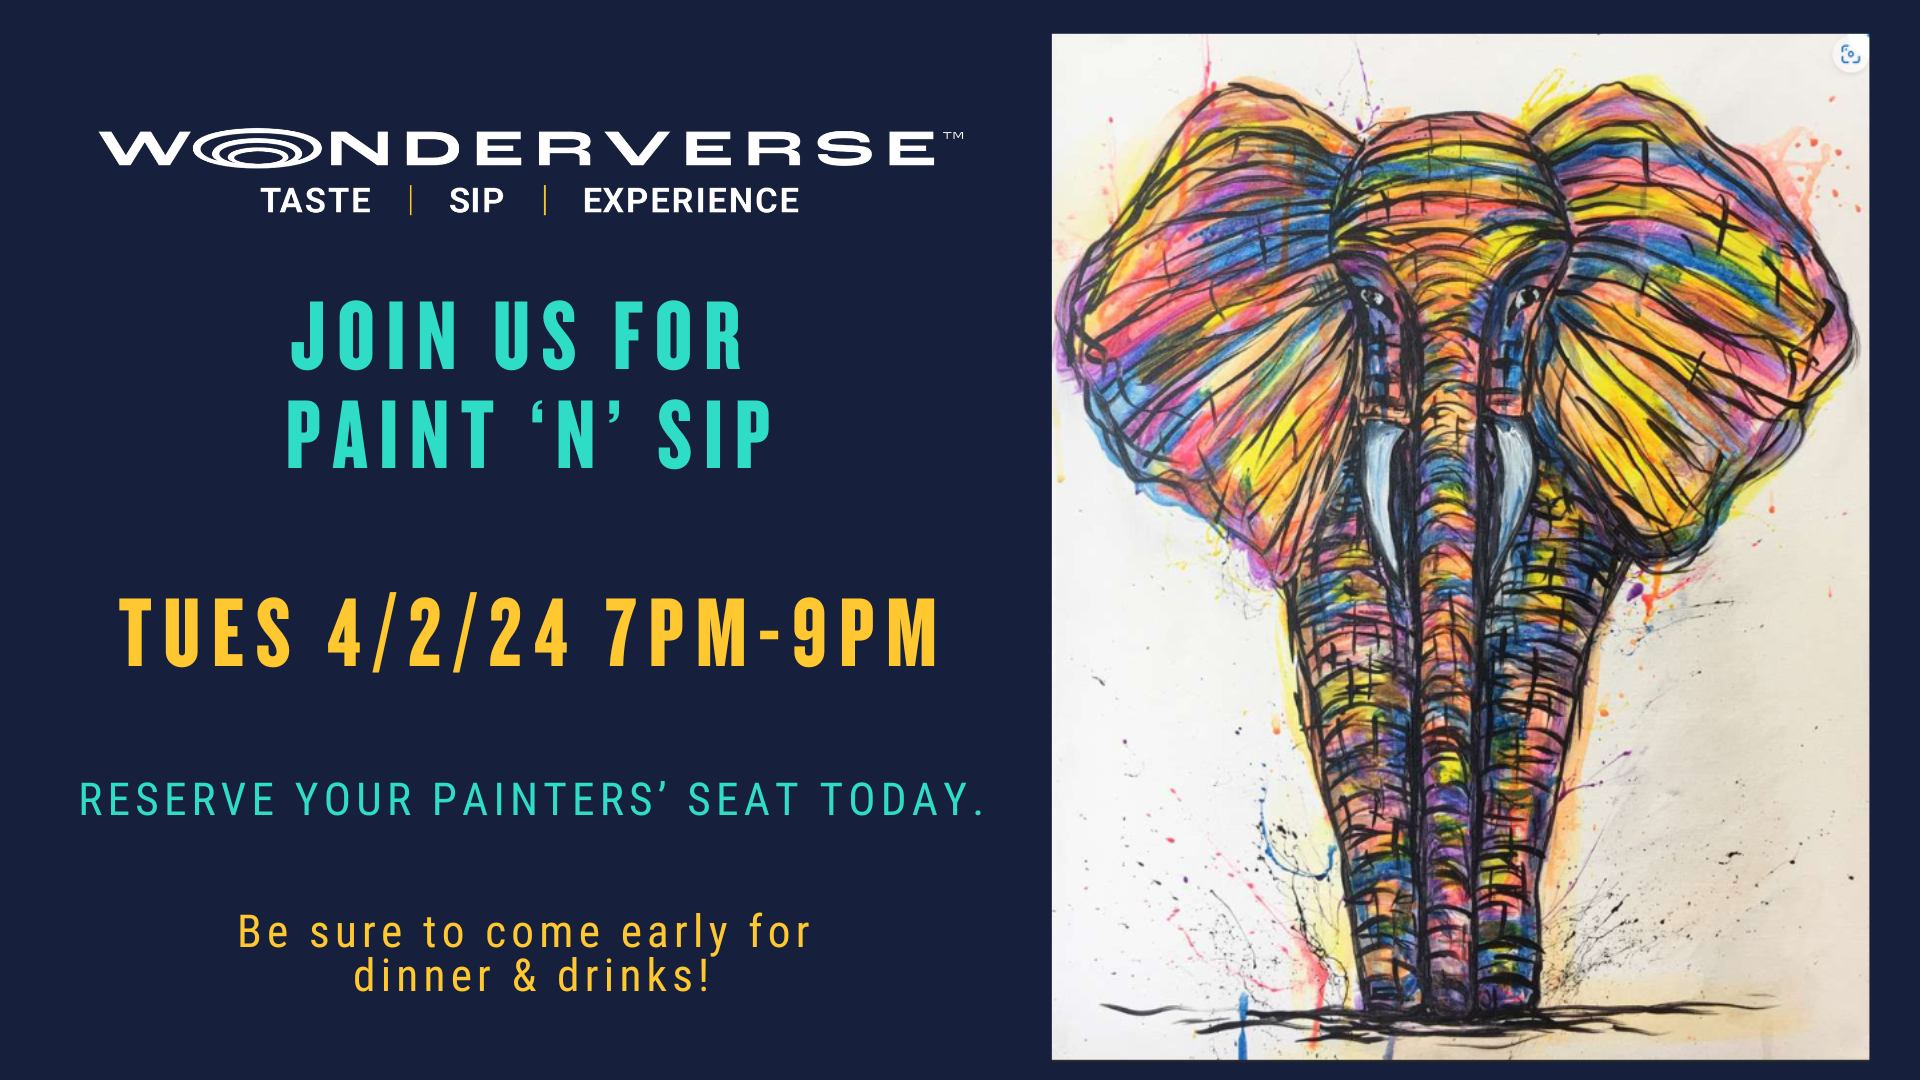 Paint, Sip & Play! Includes $20 Playing Card 